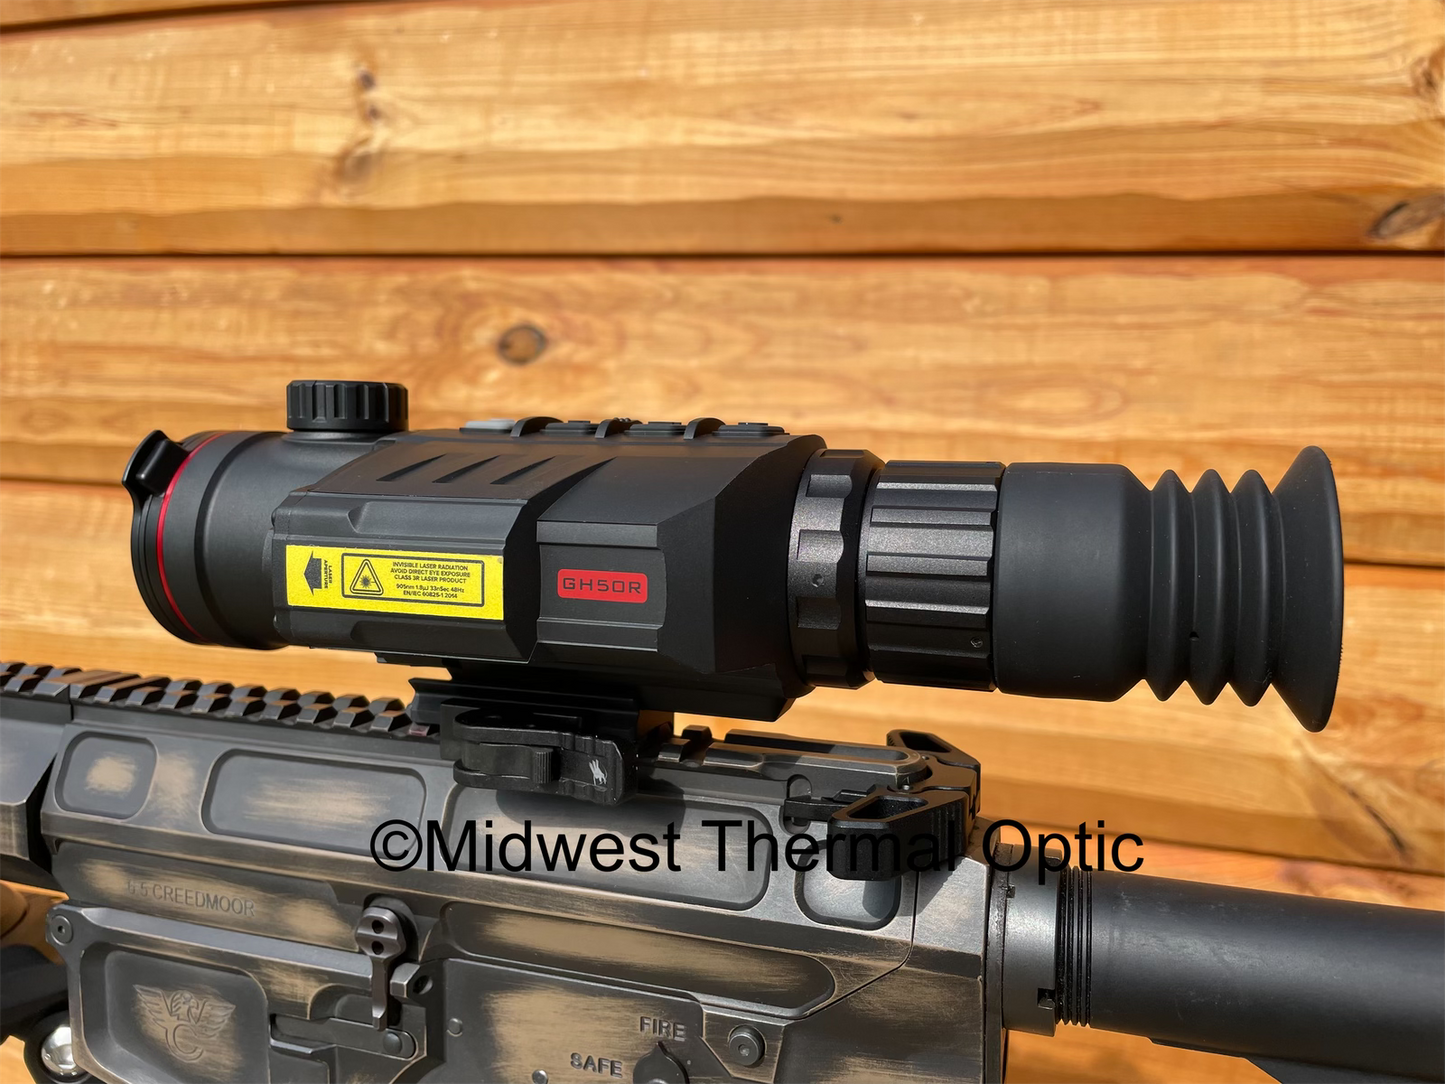 InfiRay Outdoor Rico G Series 640 3X 50mm Thermal Scope LRF Model